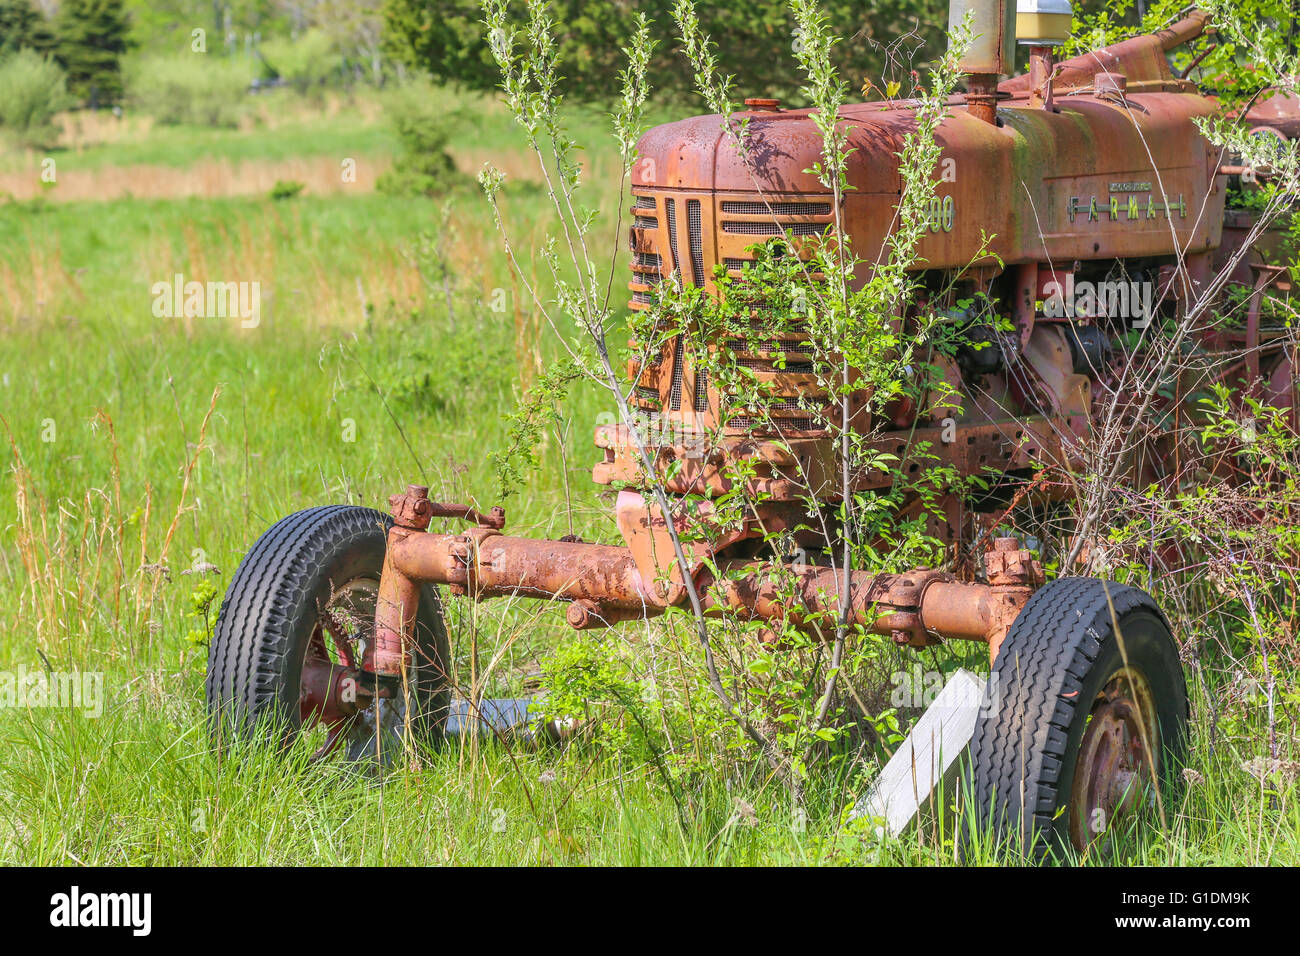 old red farm tractor sitting in an overgrown field Stock Photo